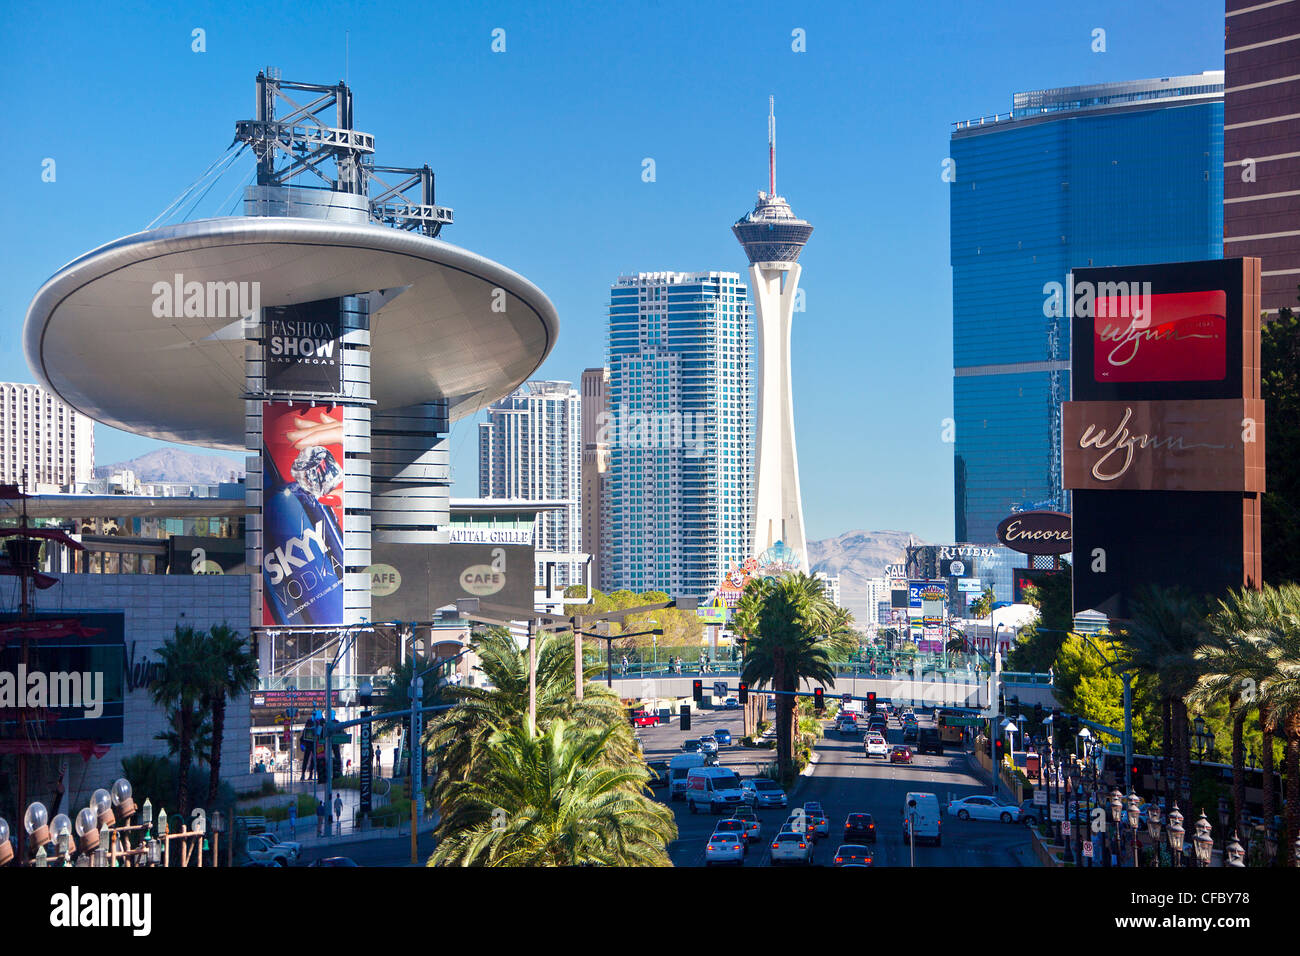 USA, United States, America, Nevada, Las Vegas, City, Strip, Avenue, Stratosphere Tower, architecture, busy, cars, casinos, cent Stock Photo